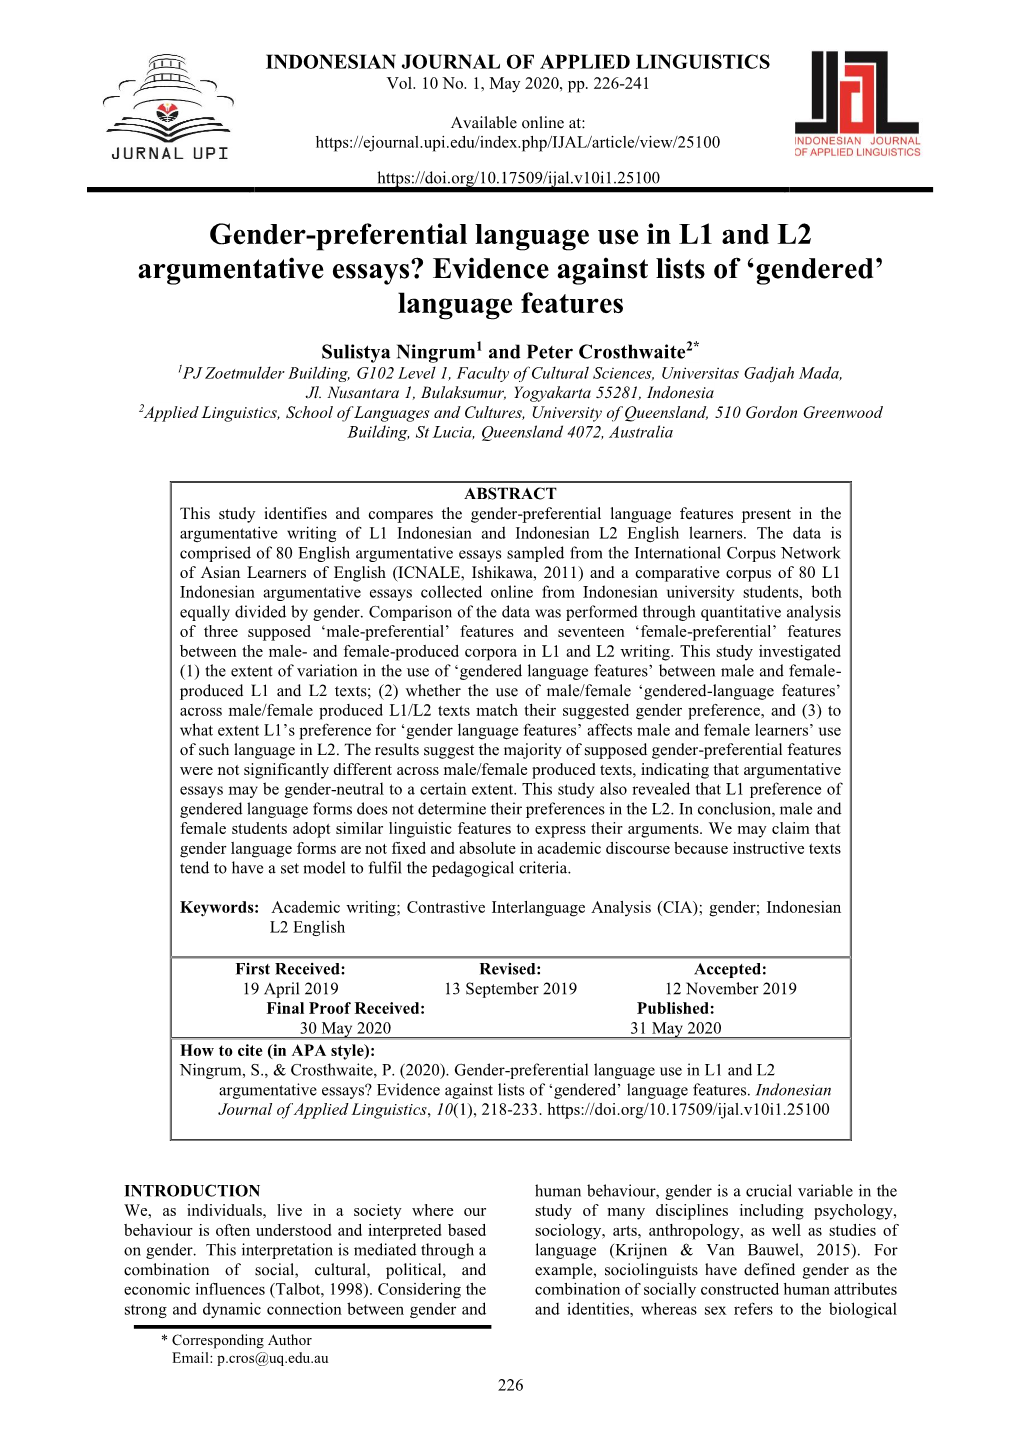 Gender-Preferential Language Use in L1 and L2 Argumentative Essays? Evidence Against Lists of ‘Gendered’ Language Features